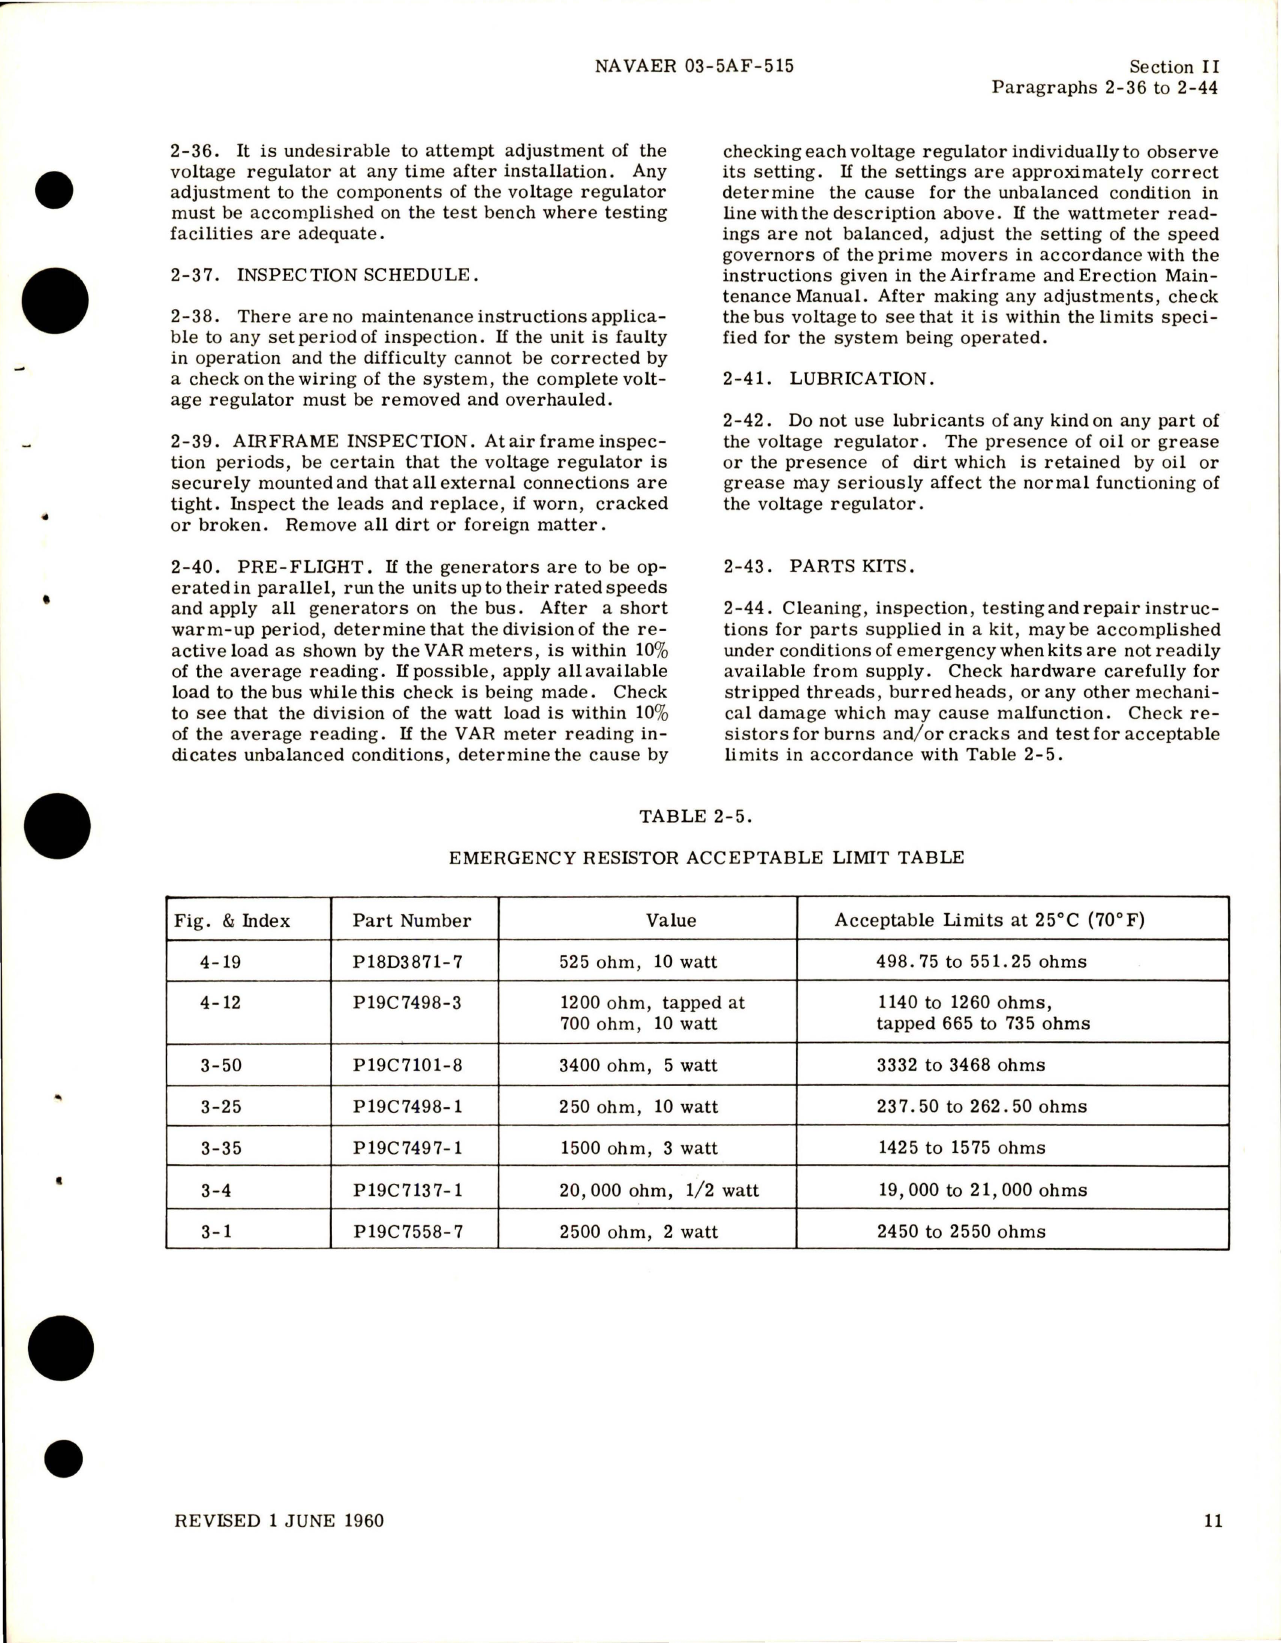 Sample page 5 from AirCorps Library document: Operation, Service and Overhaul Instructions for Voltage Regulator Static Type - Part A40A1750